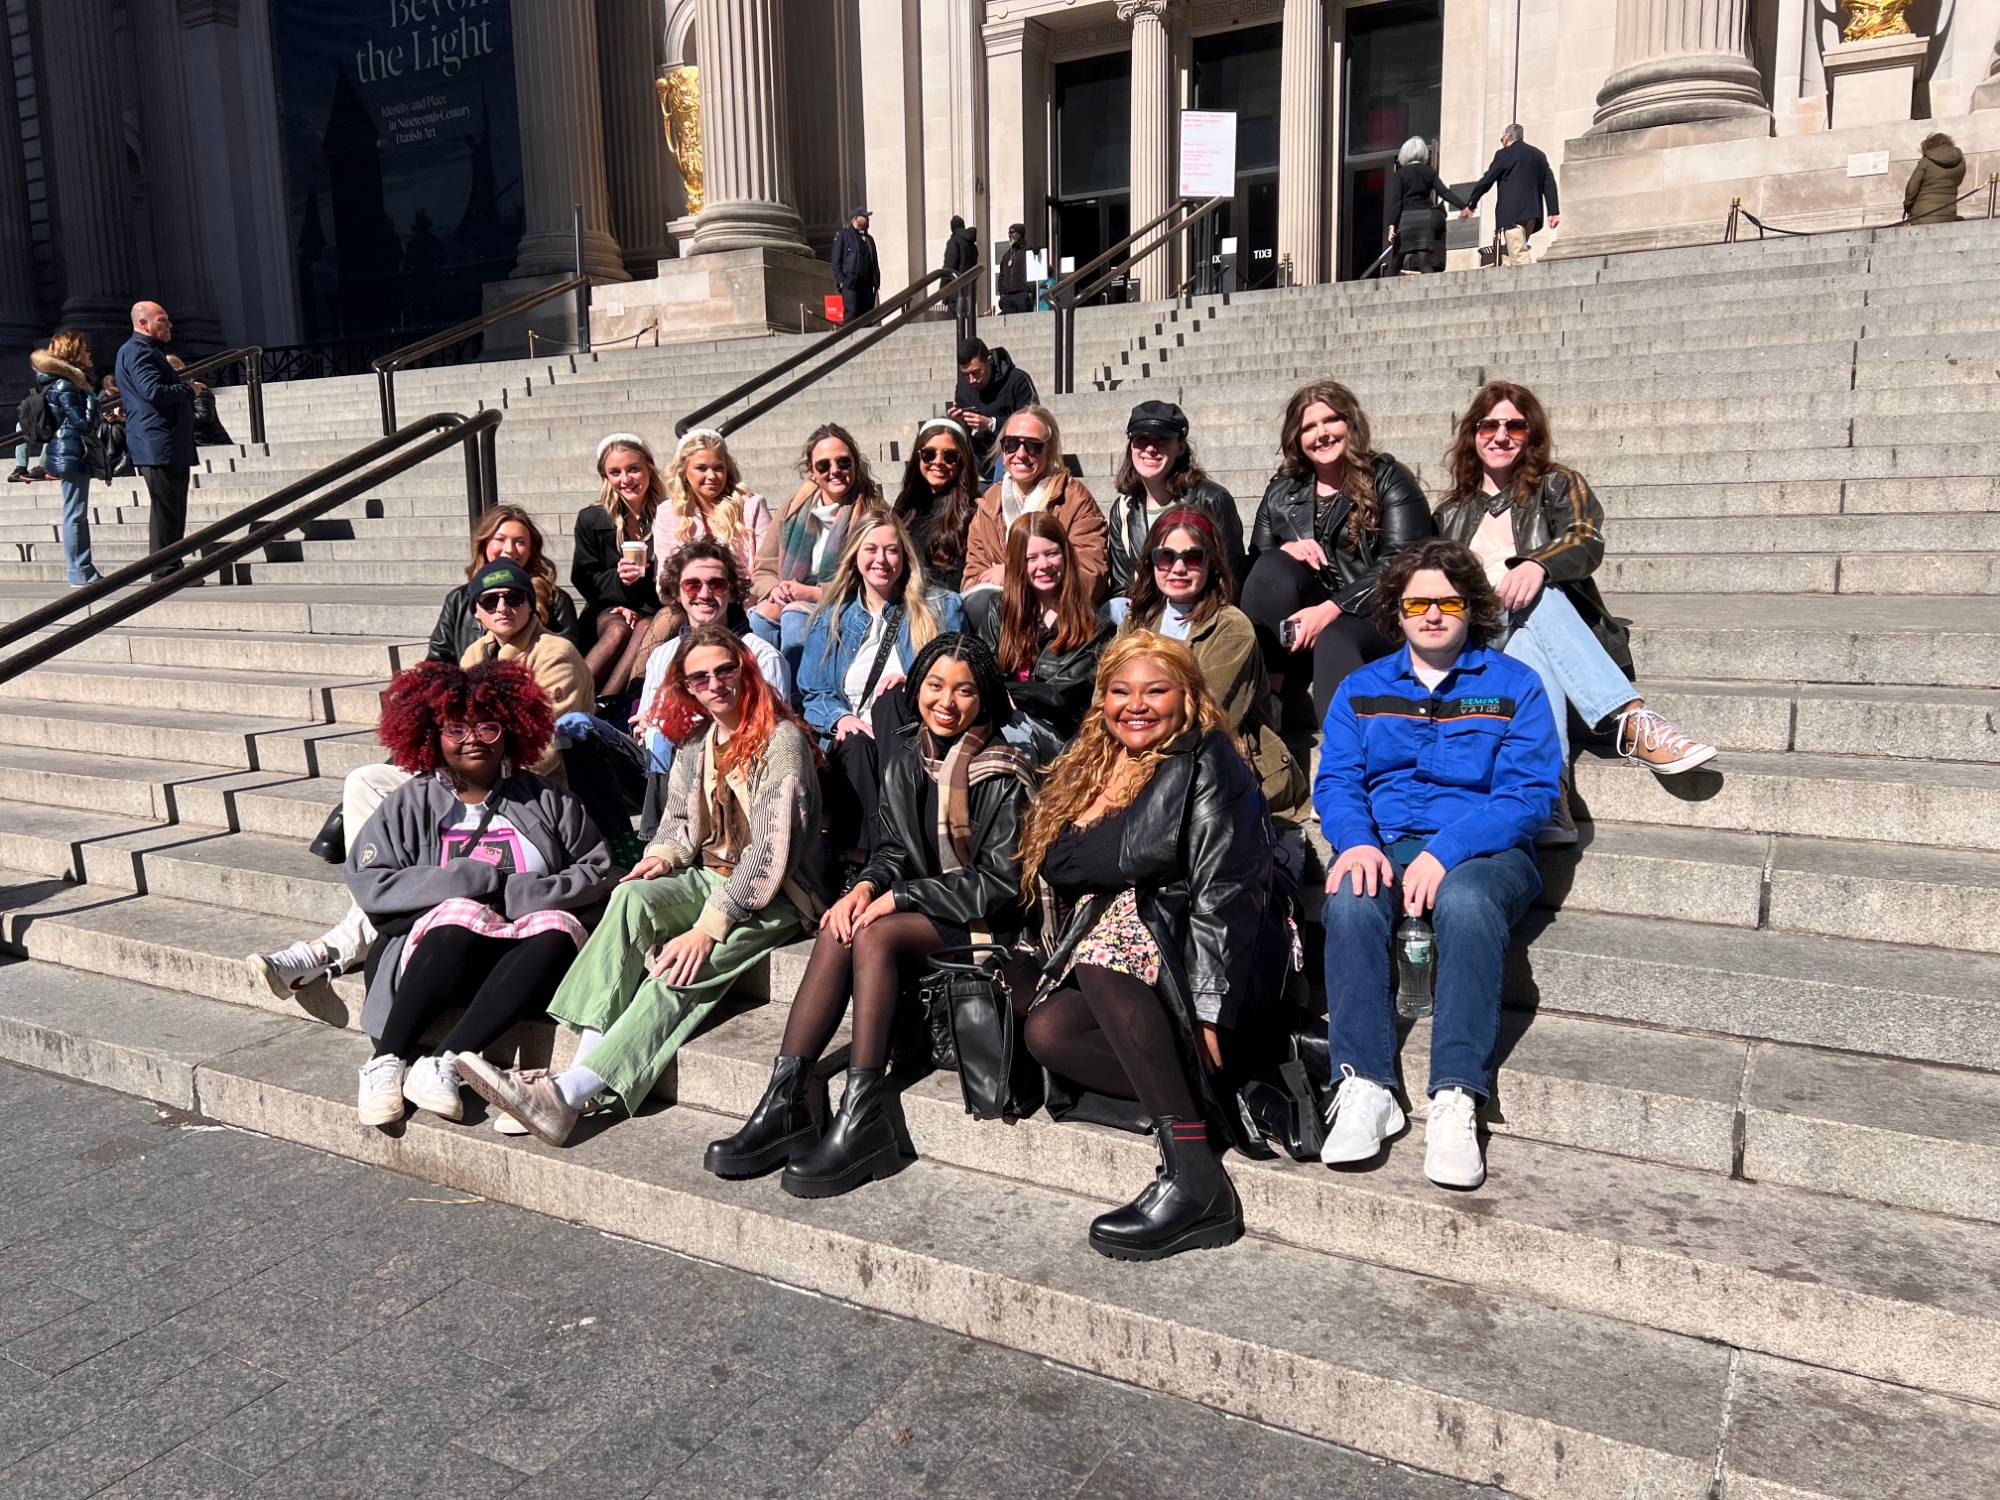 Sitting on the steps of The Metropolitan Museum of Art before our self-guided tour of centuries of art and design history